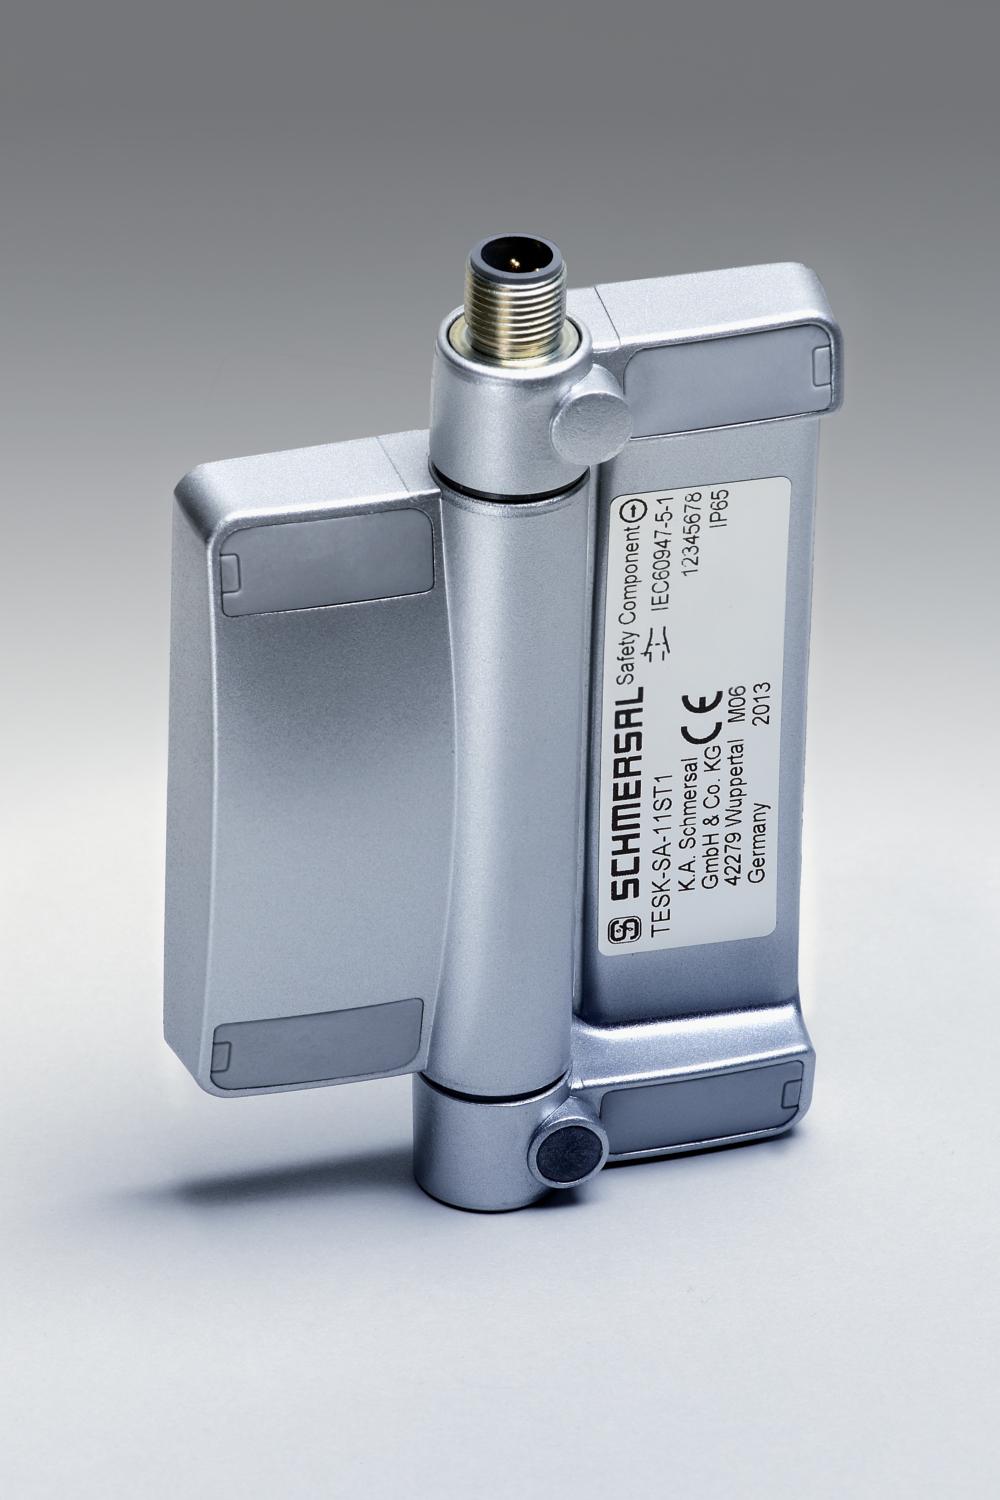 Schmersal TESK-LU-12ST2 Safety switch for hinged guards; Hinge safety switch; Metal enclosure